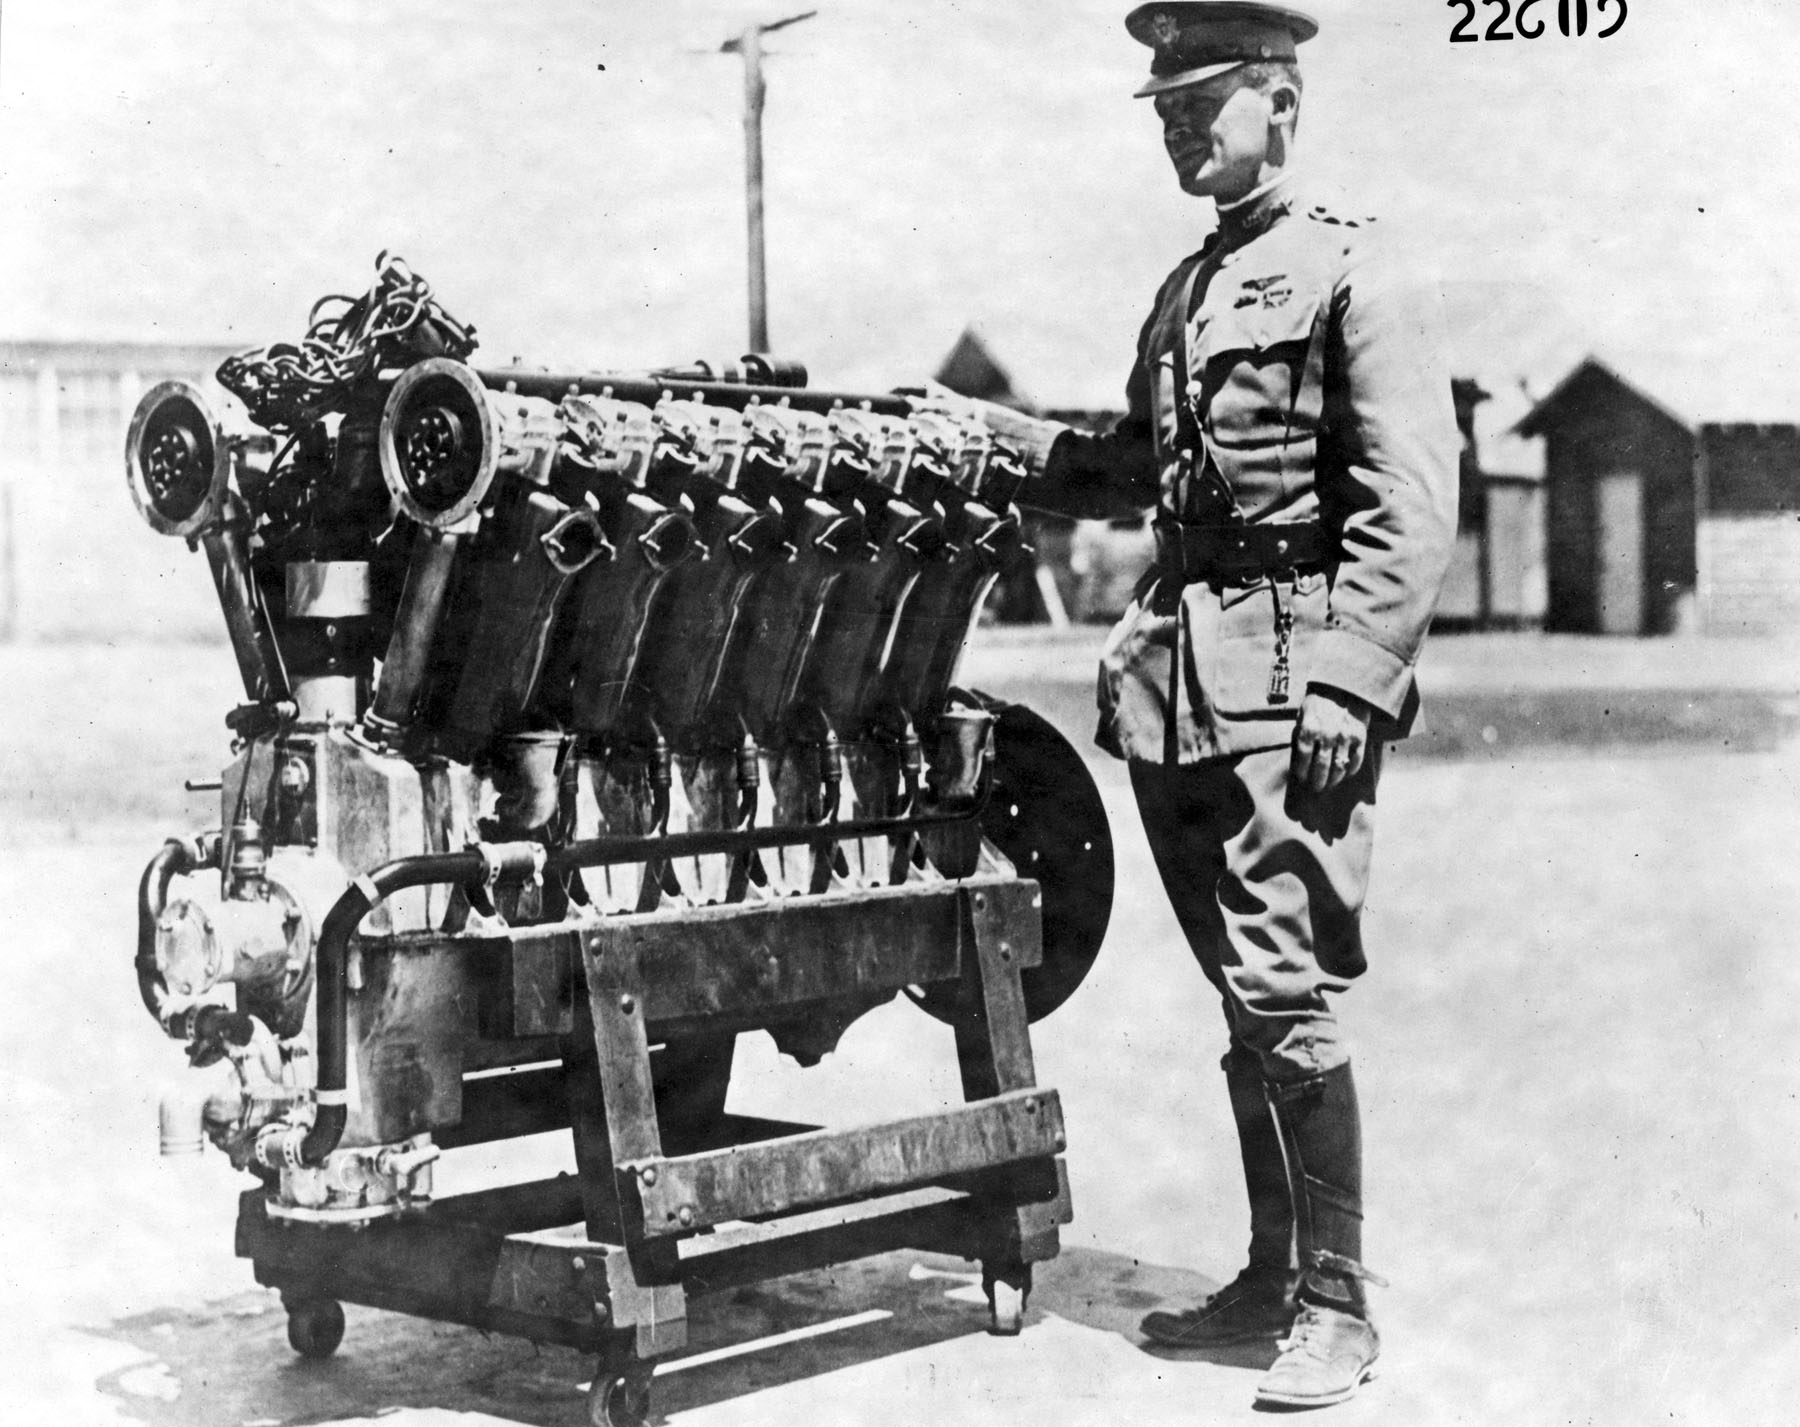 Major Henry Arnold with the first Liberty V-12 engine, circa 1917-1918